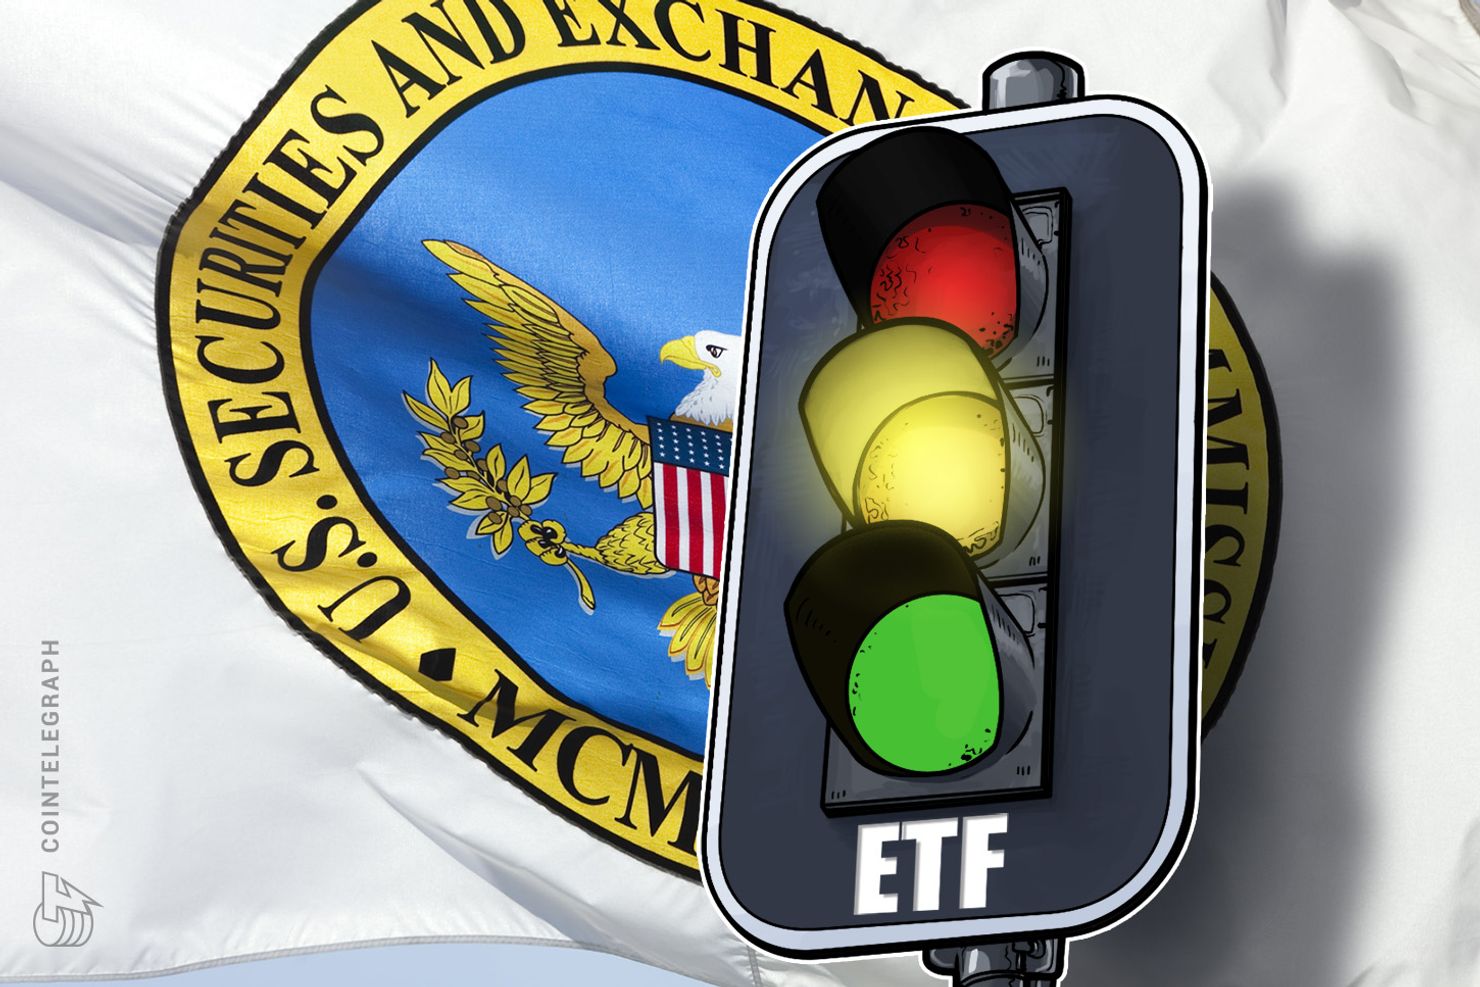 CNBC's Analyst Brian Kelly Says Bitcoin ETF Approval Likely by February 2019 | Cointelegraph